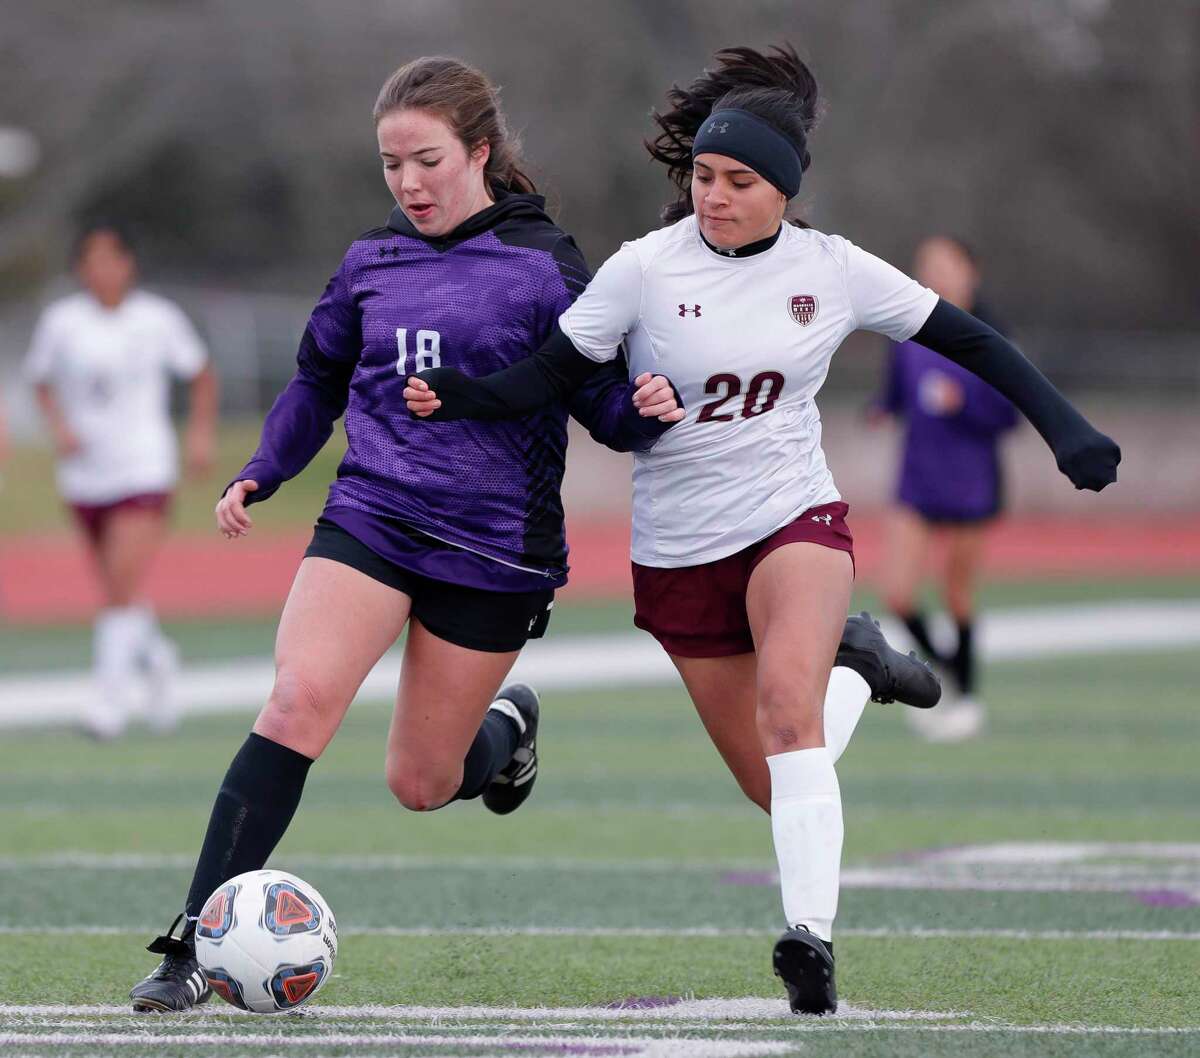 Willis’ Lucyna Smith (18) battles with Magnolia West’s Karina Sosa (20) for the ball in the first period of a high school soccer match during the Willis Kat Cup soccer tournament, Saturday, Jan. 15, 2022, in Willis.